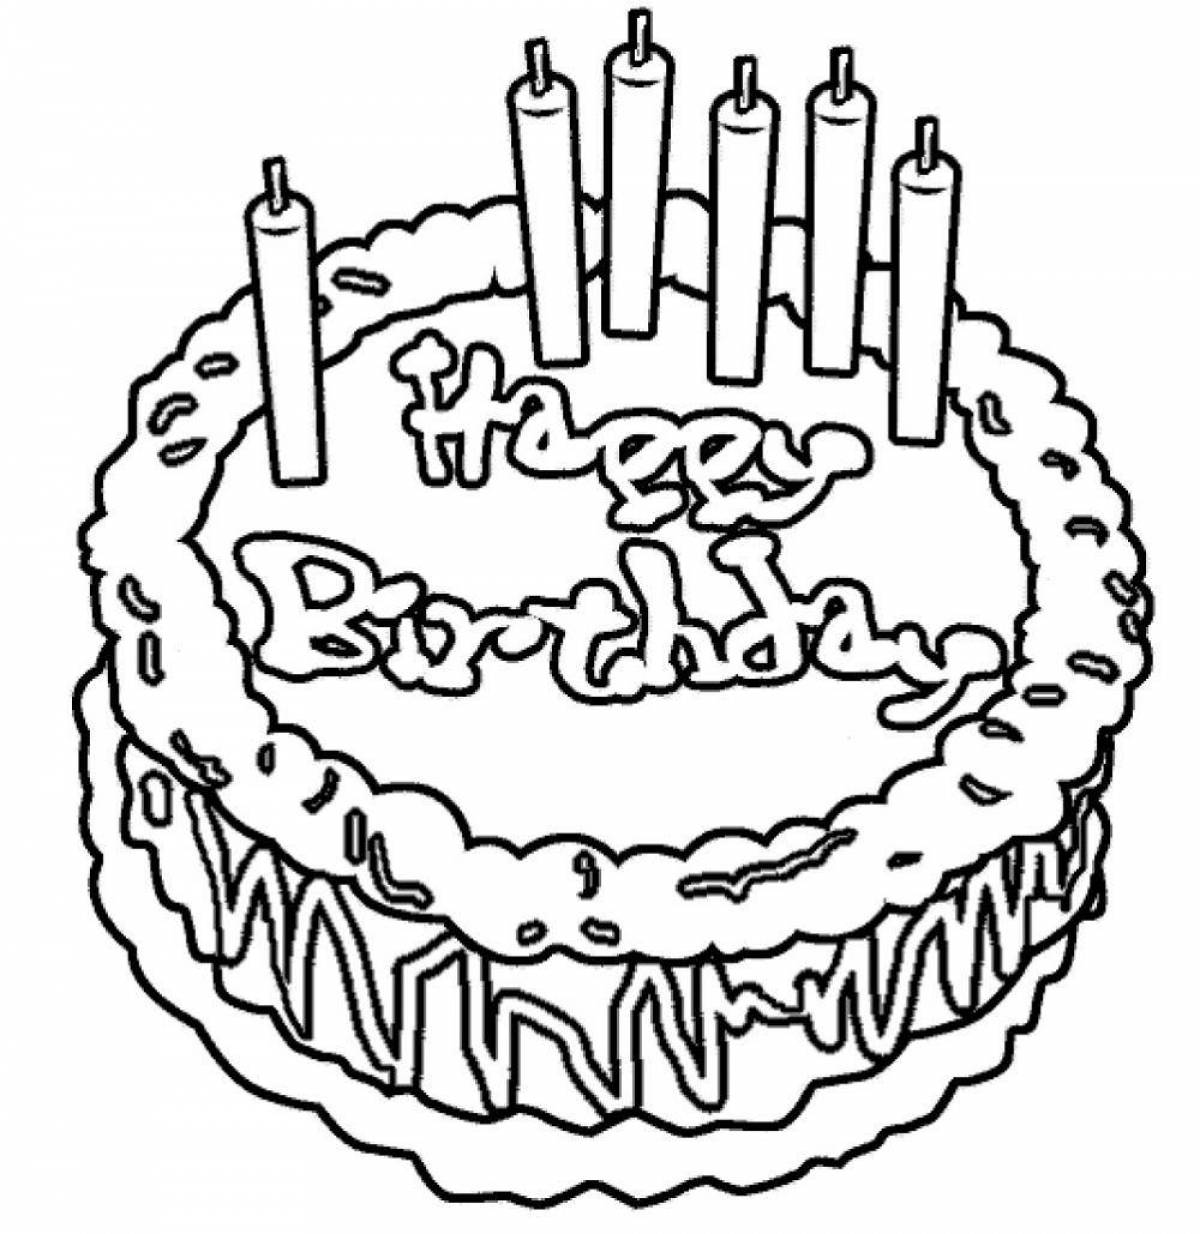 Fabulous birthday cake coloring page